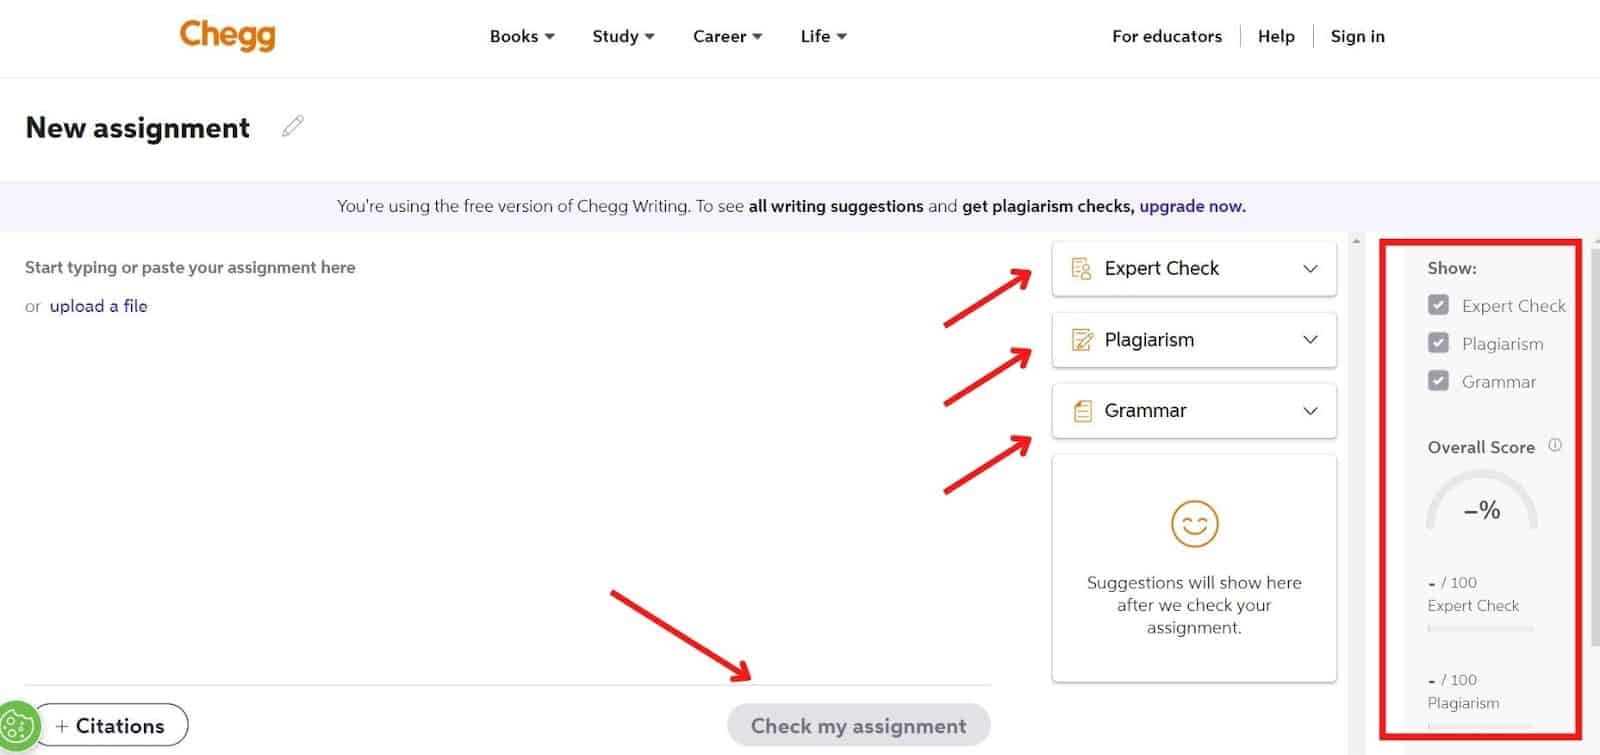 Feature dashboard of Chegg app pointing towards expert check, grammar and plagiarism checks in the content